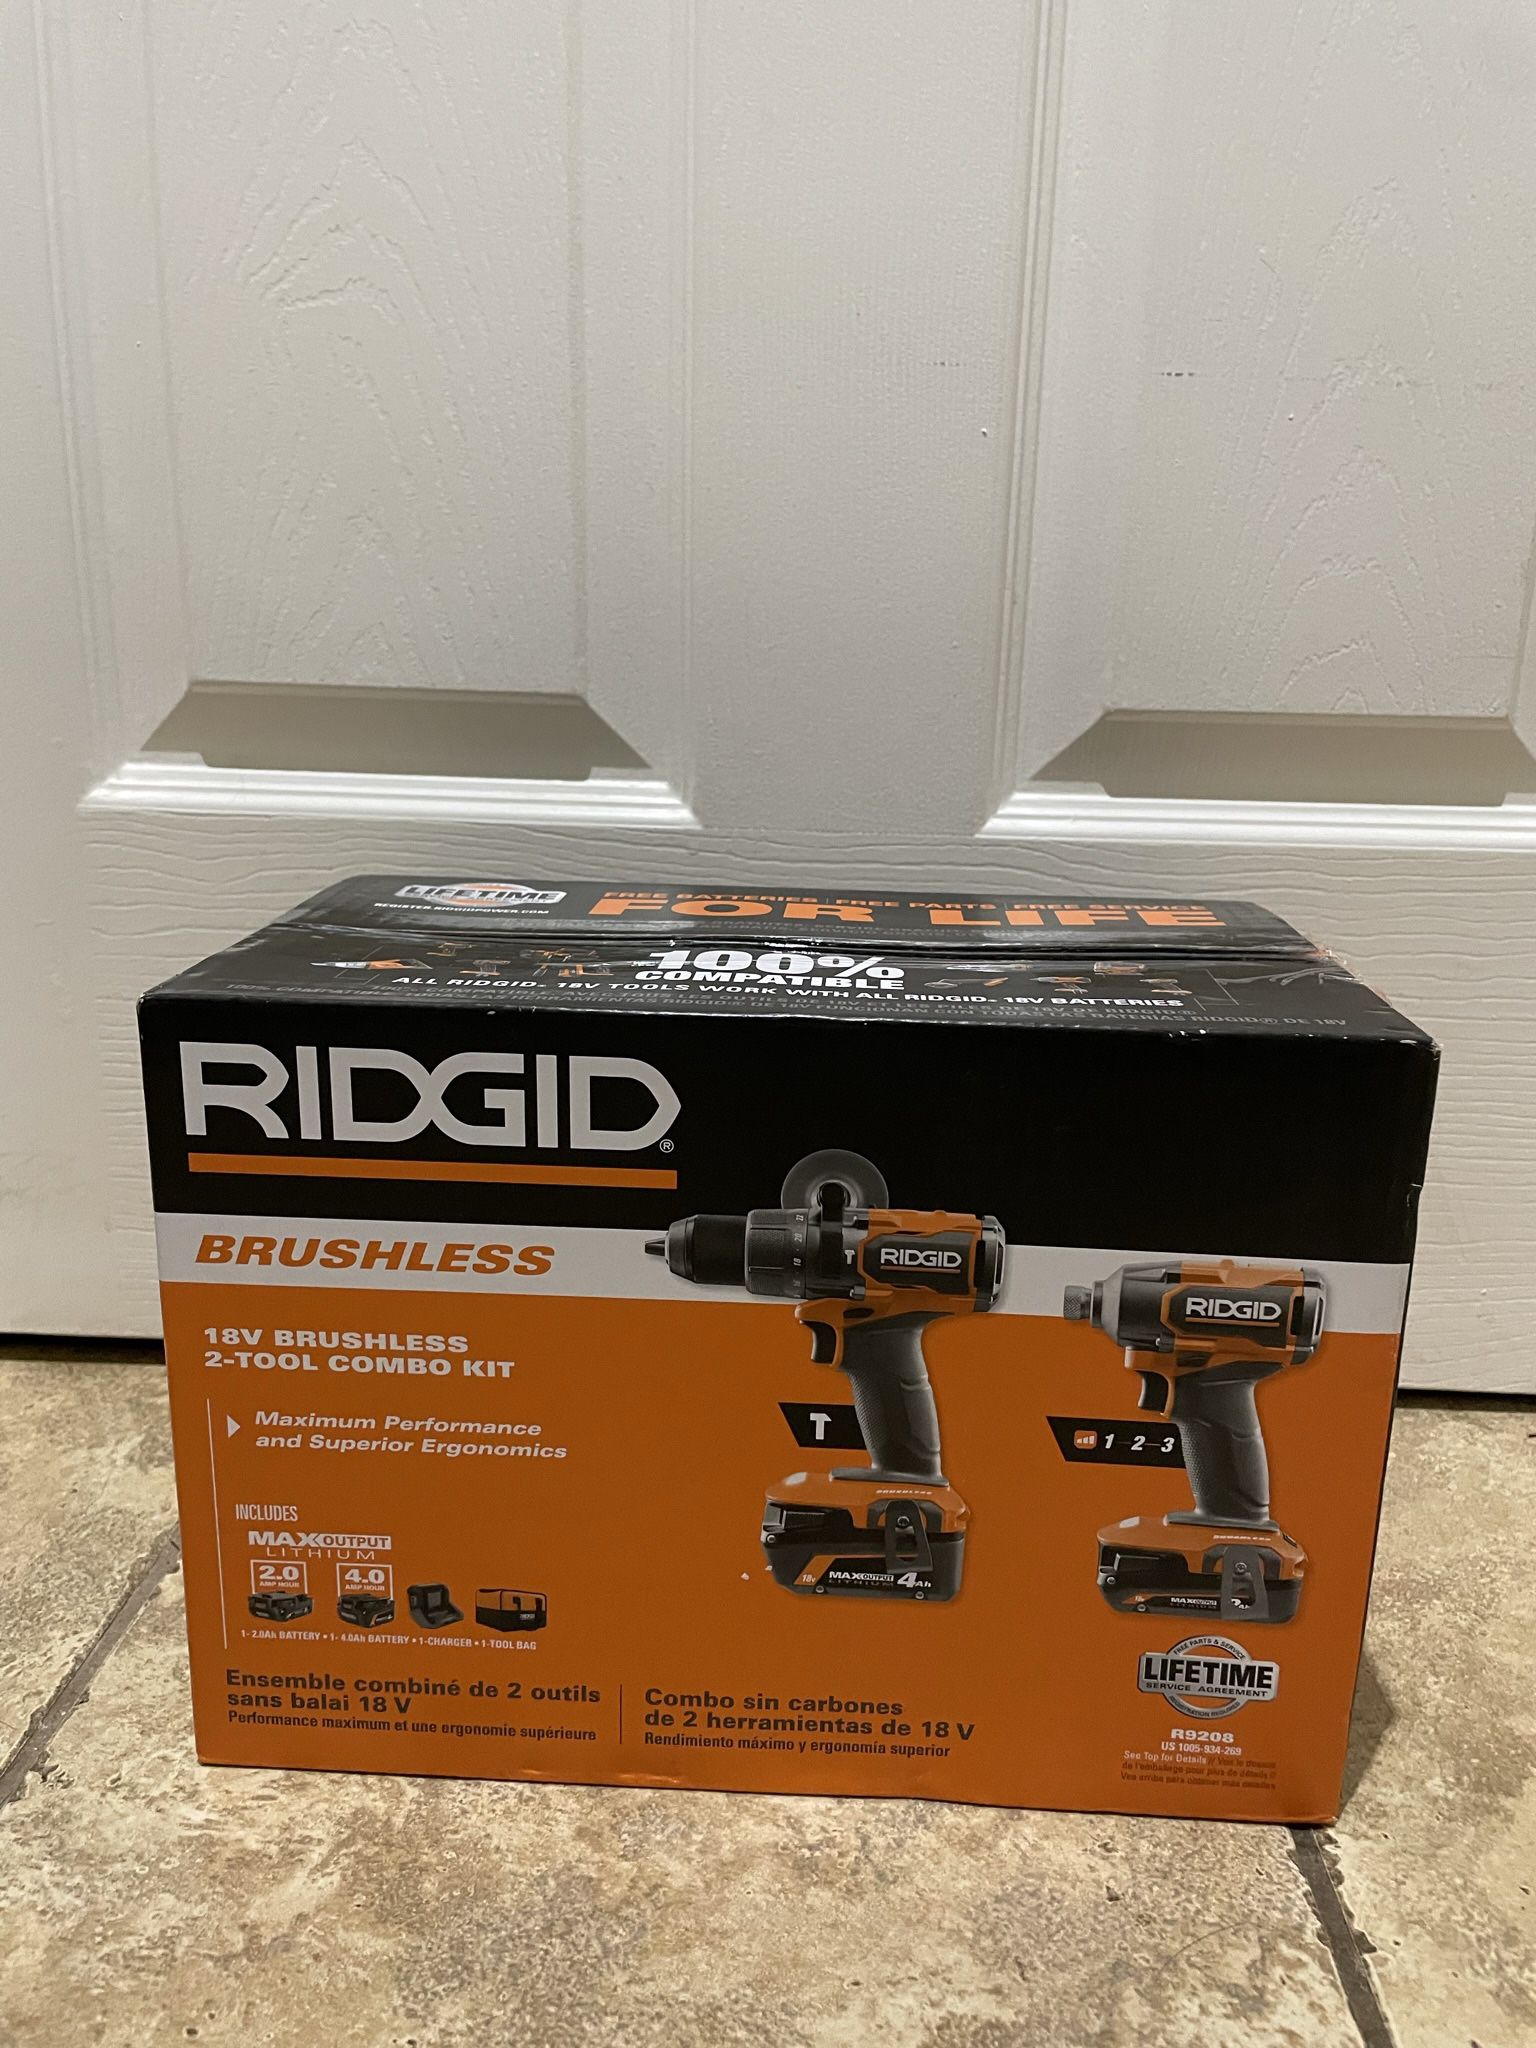 Ridgid 18V Brushless Cordless 2-Tool Combo Kit with Hammer Drill, Impact Driver, (2) Batteries, Charger, and Bag